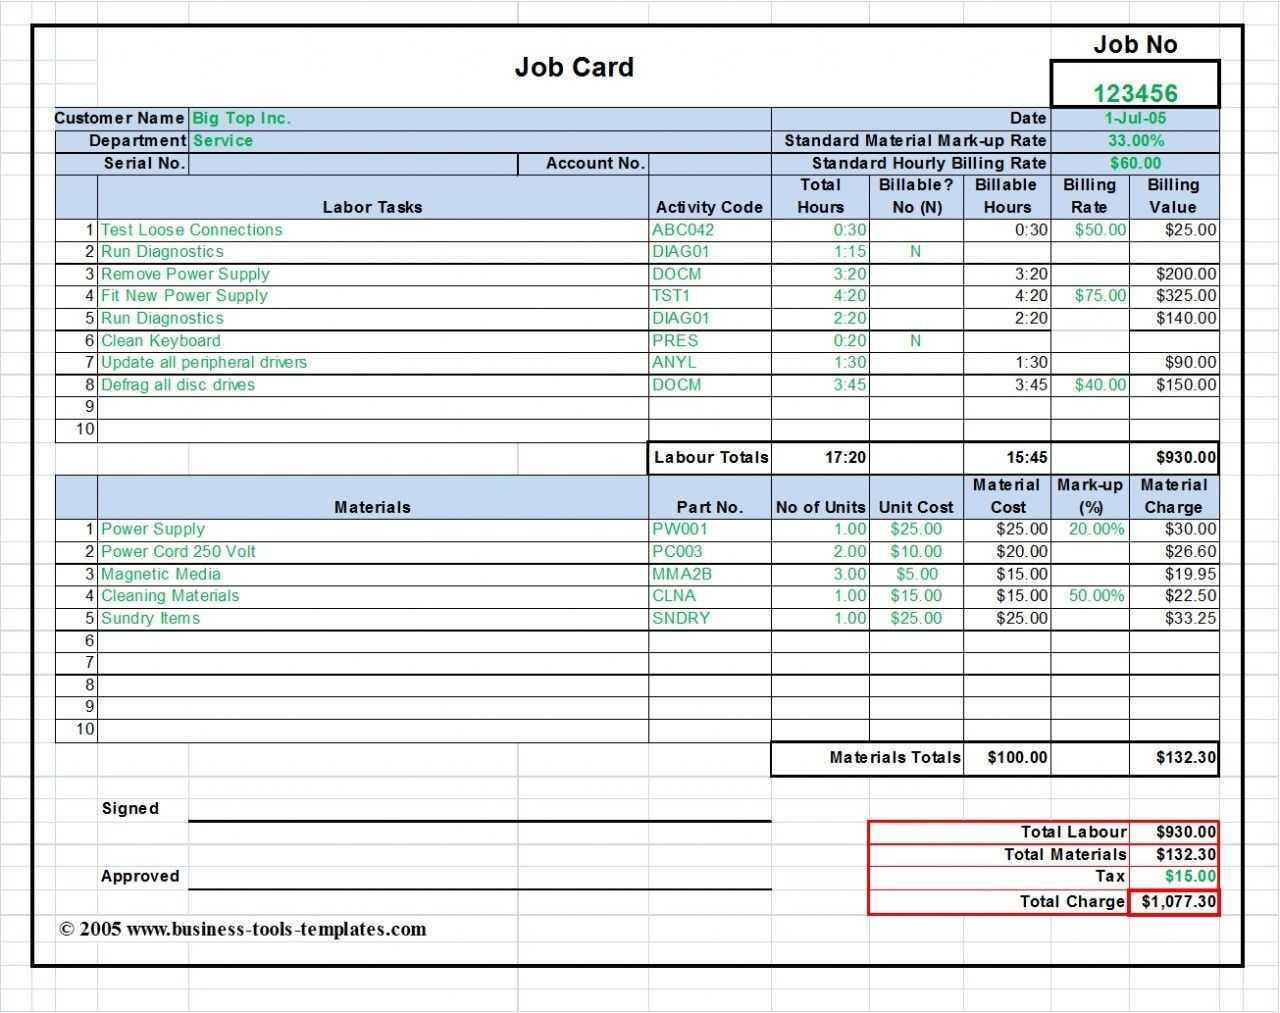 Workshop Job Card Template Excel, Labor & Material Cost With Sample Job Cards Templates